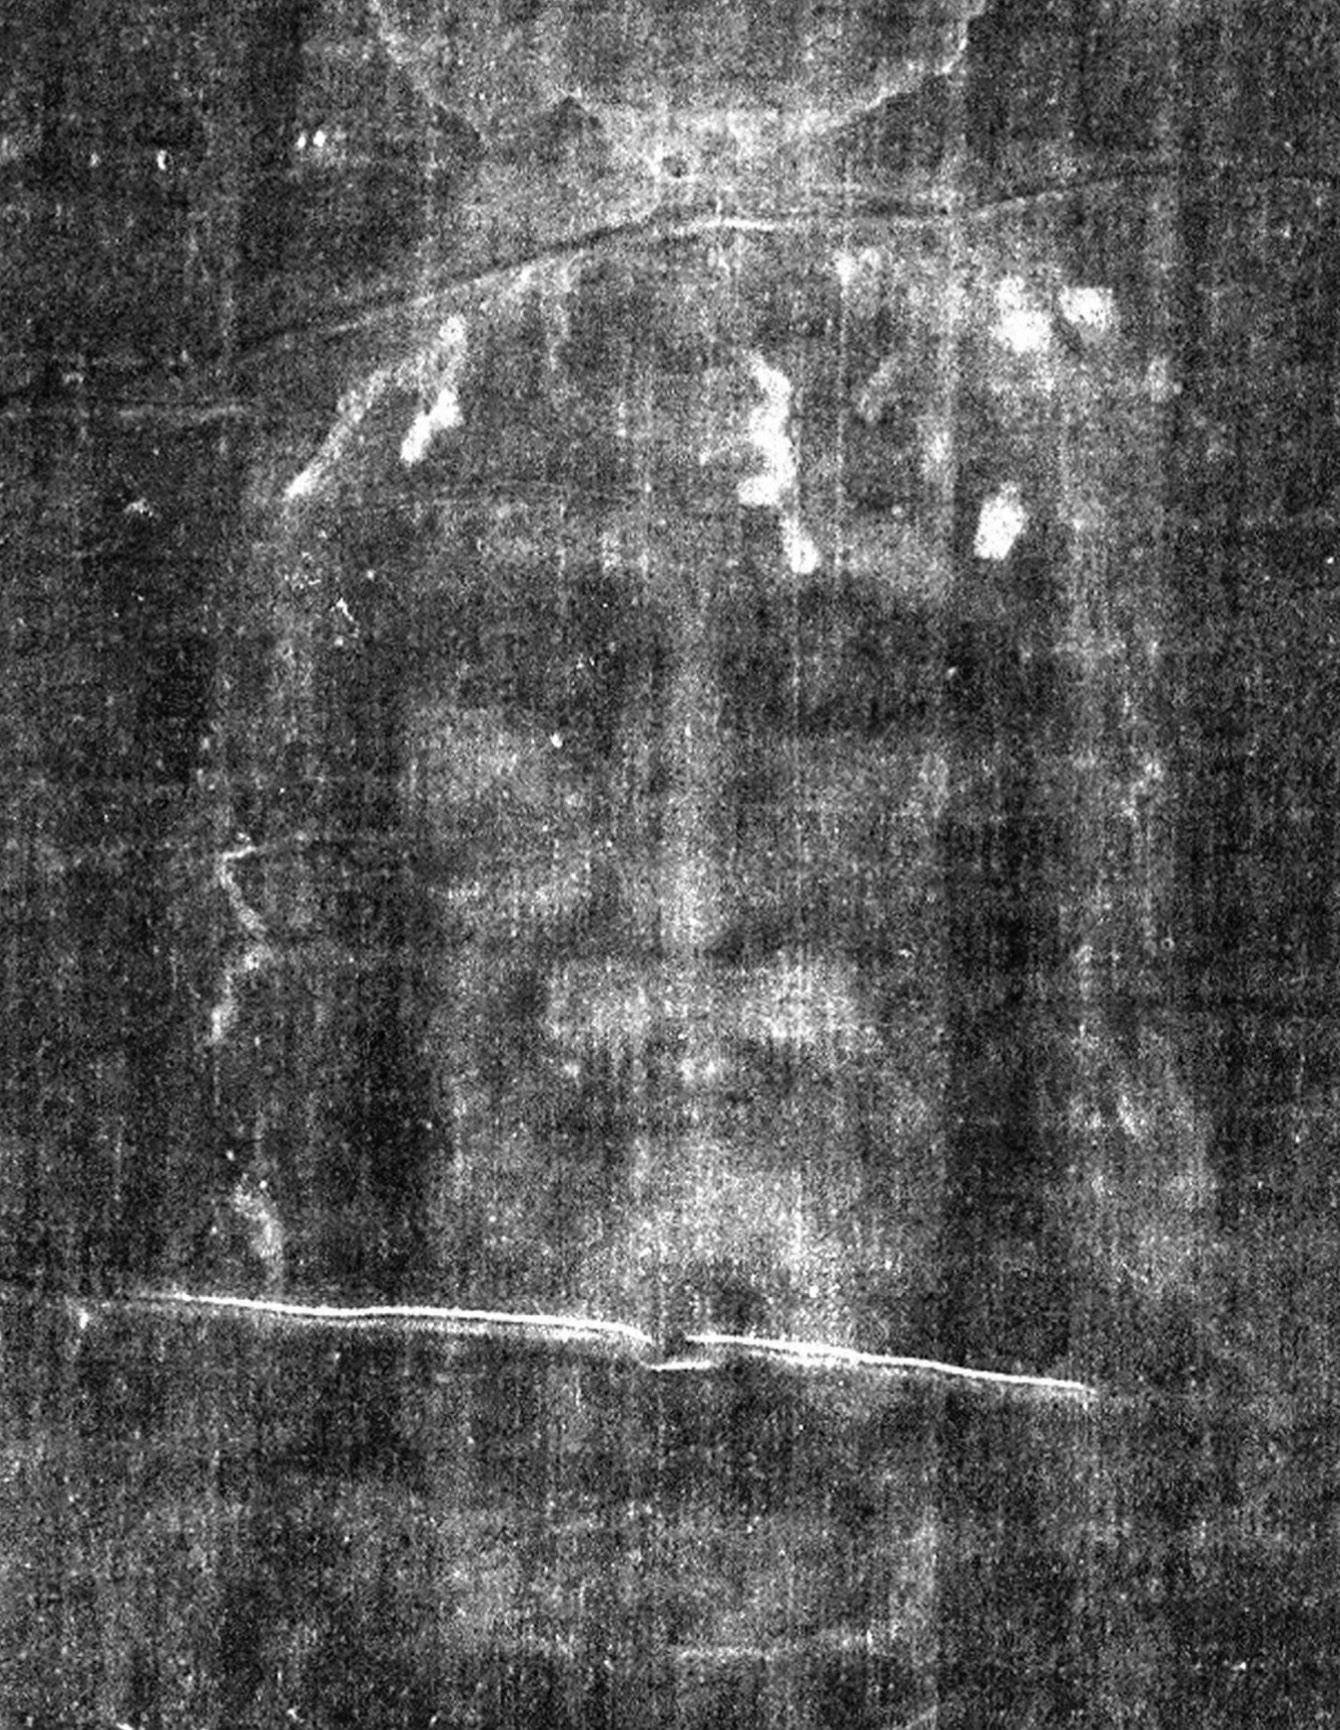 The Shroud of Turin comes to Wells this easter - a study on the crucifixion